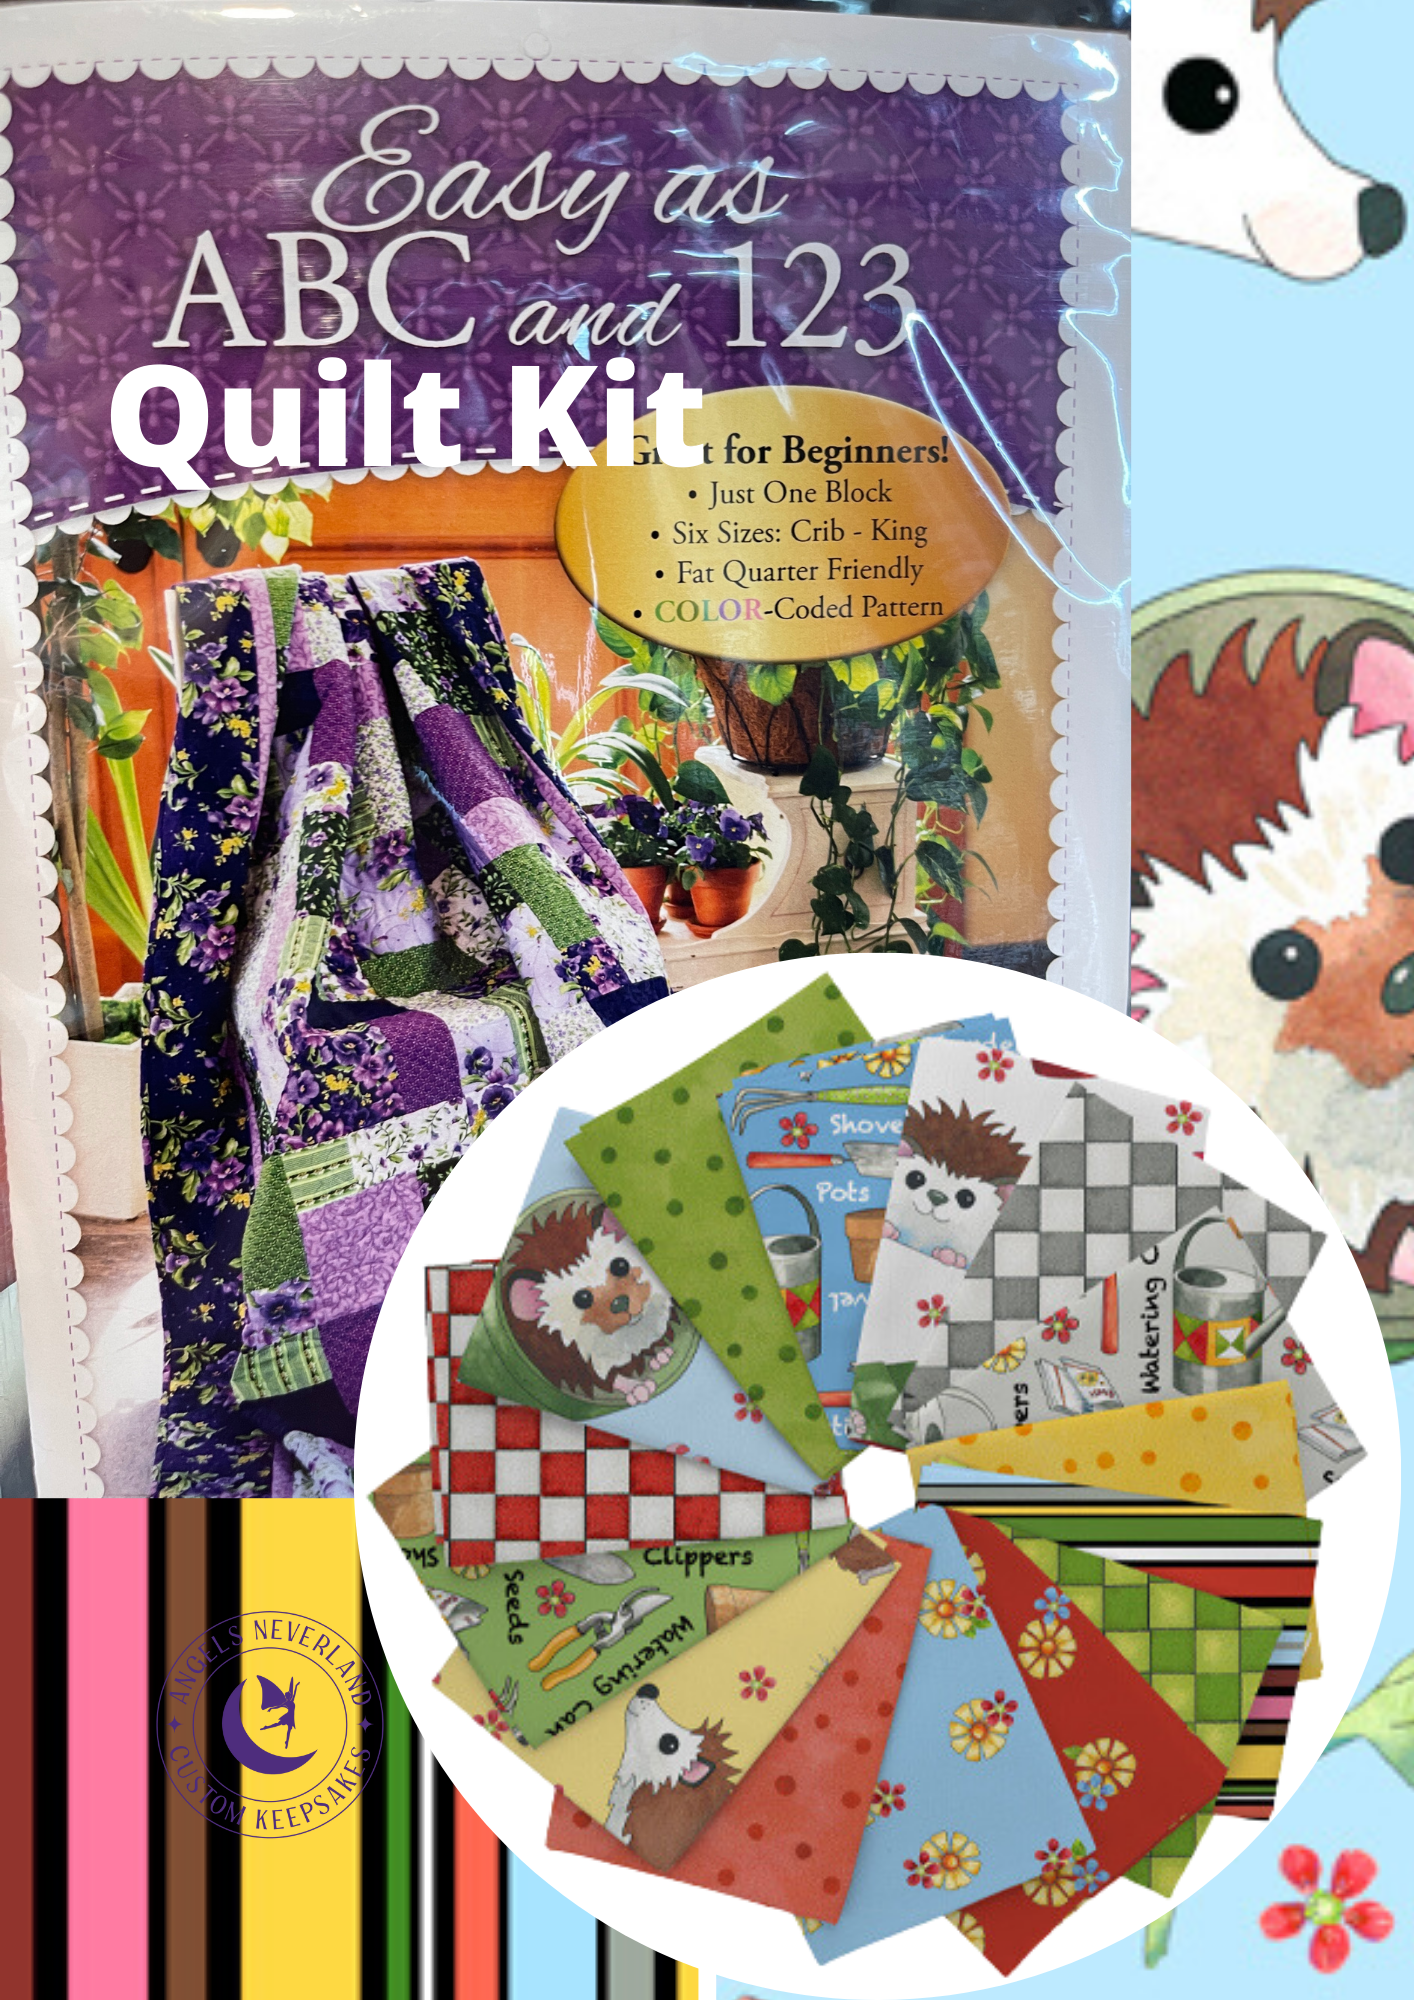 QT Fabrics Quilt Kit Quilt Kit Top & Binding Only Who Let The Hogs Out Beginner Quilt Kit Easy as ABC and 123 Pattern for Lap Size 57" x 75" quilt